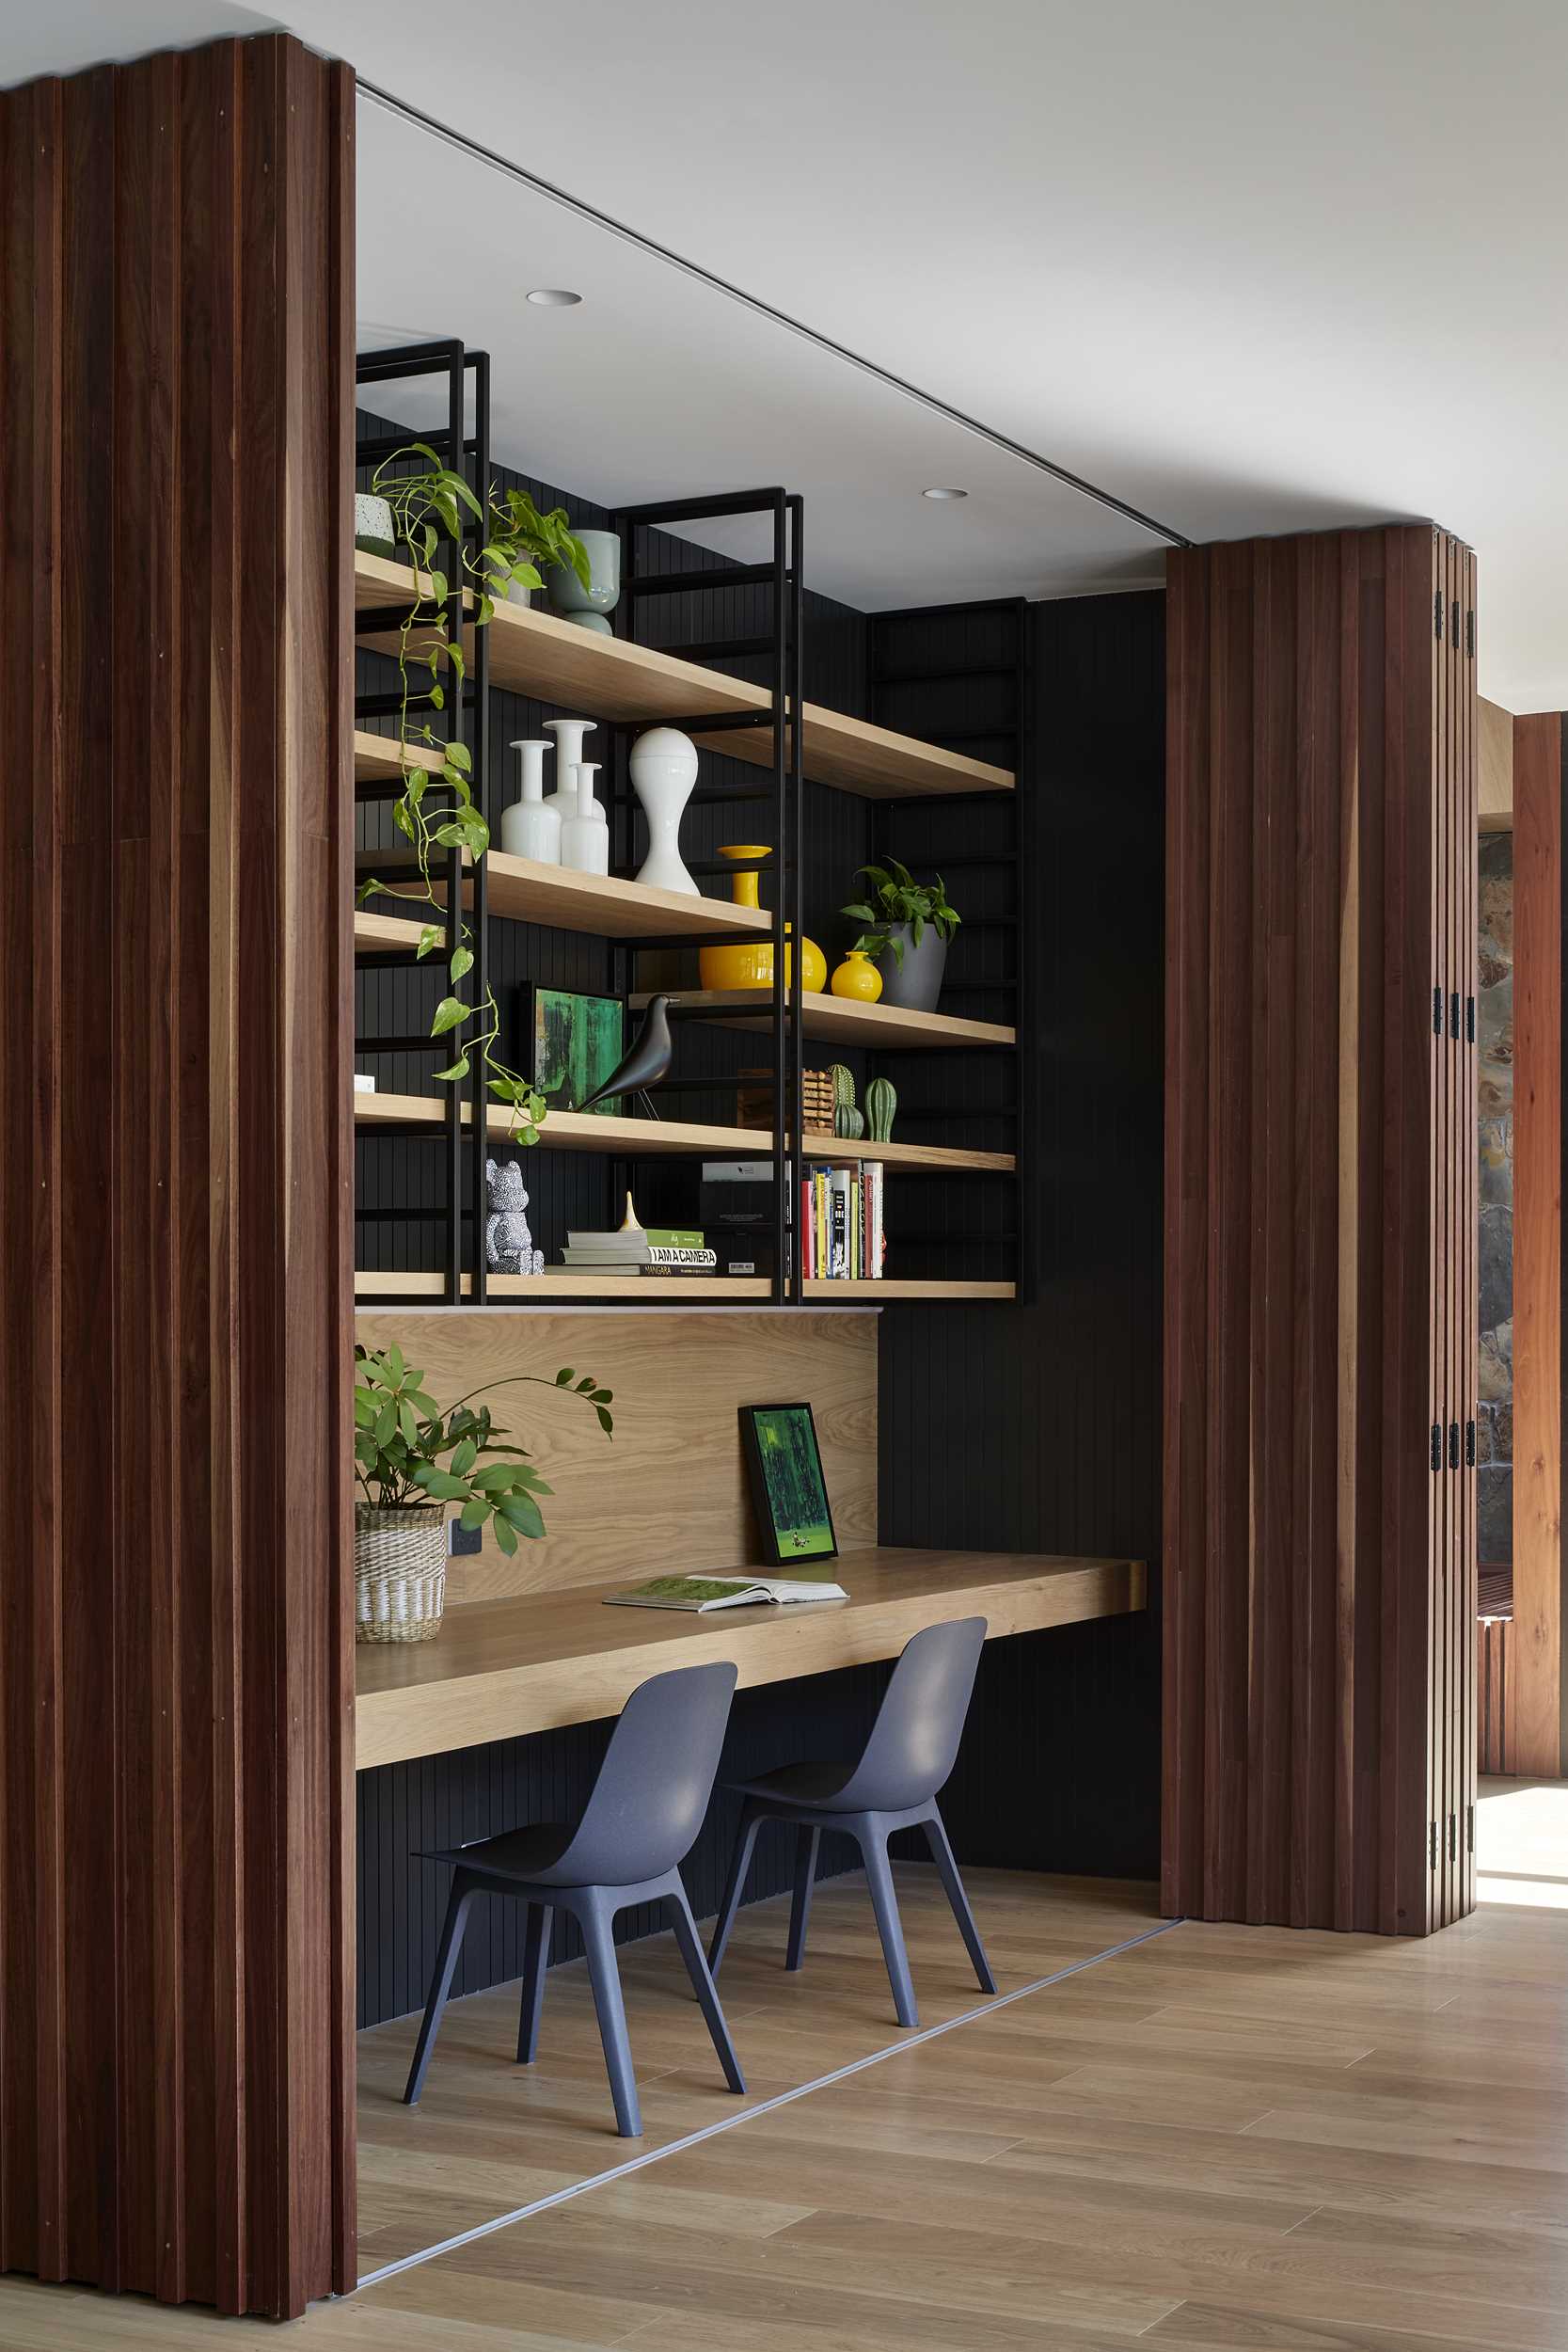 A modern home interior includes a wood accent wall that opens to reveal a hidden office for two.